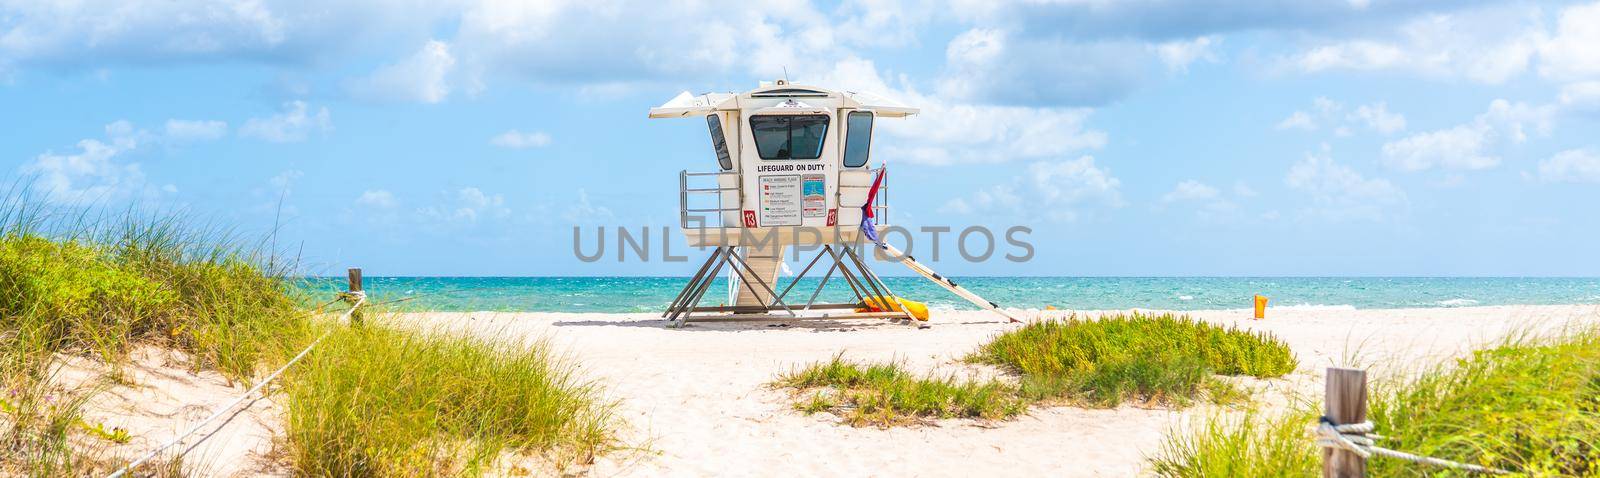 Lifeguard station on the beach in Fort Lauderdale, Florida.